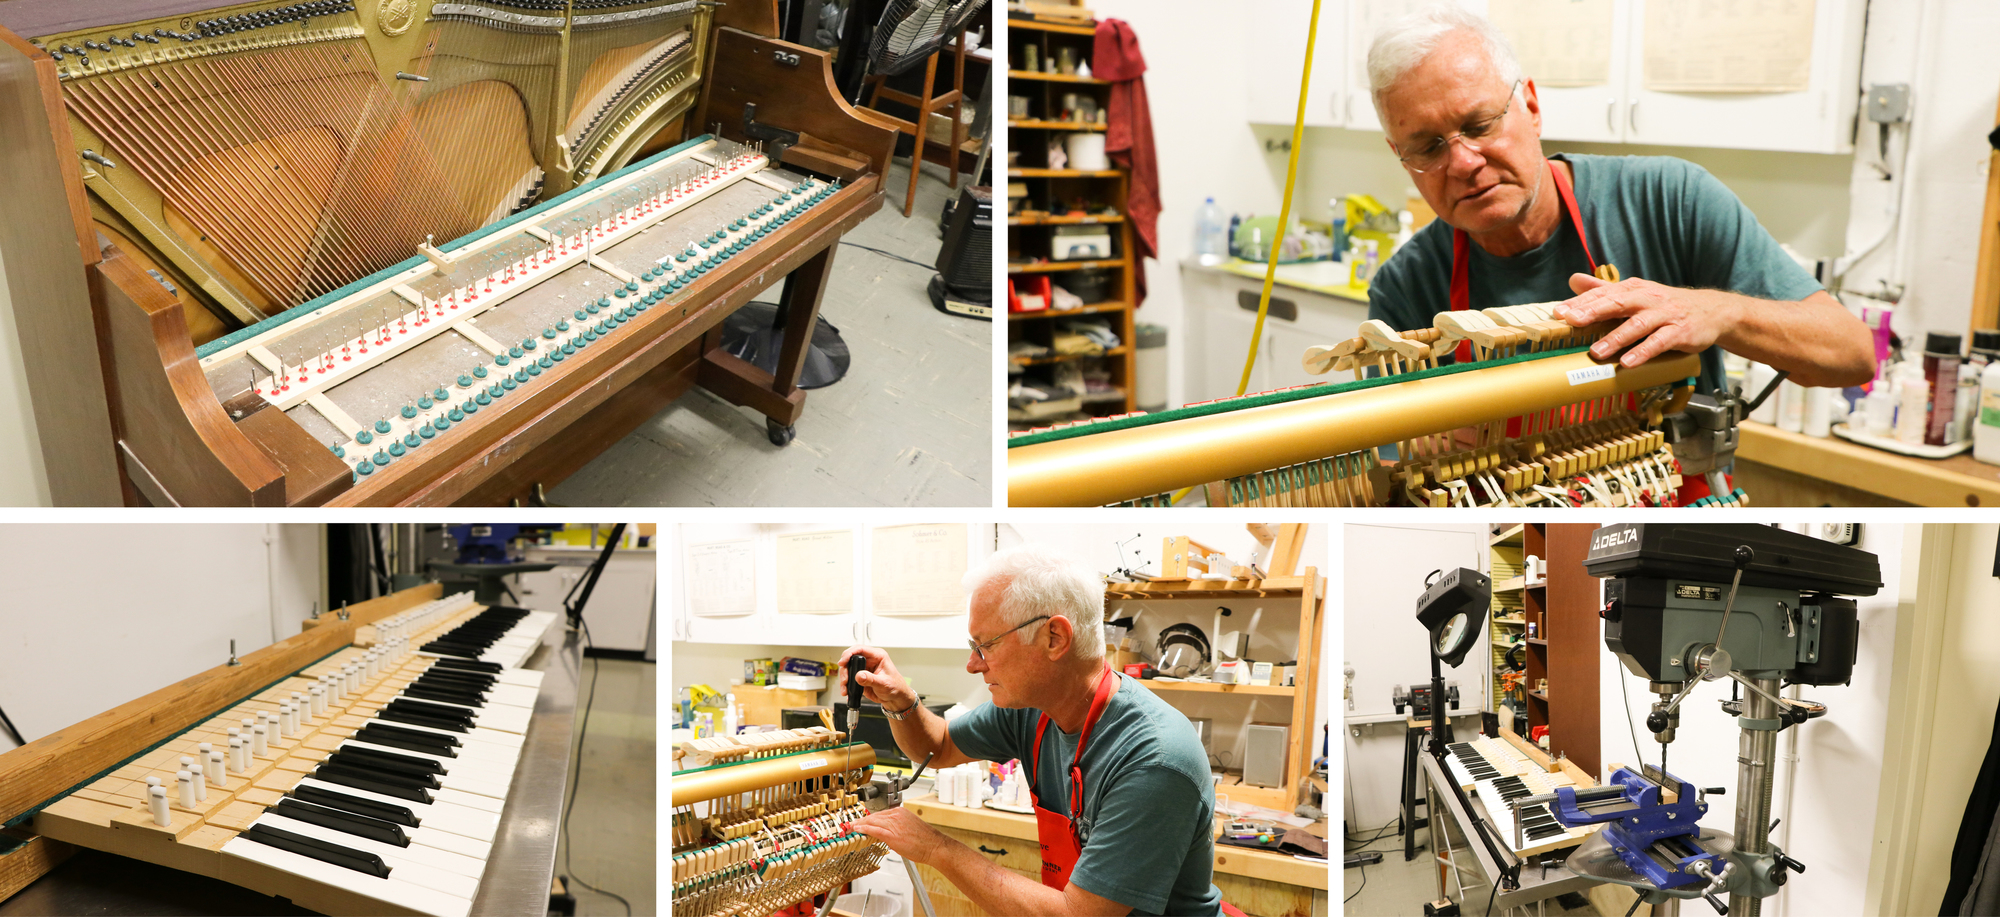 Scenes from the Piano Shop with David Cesca